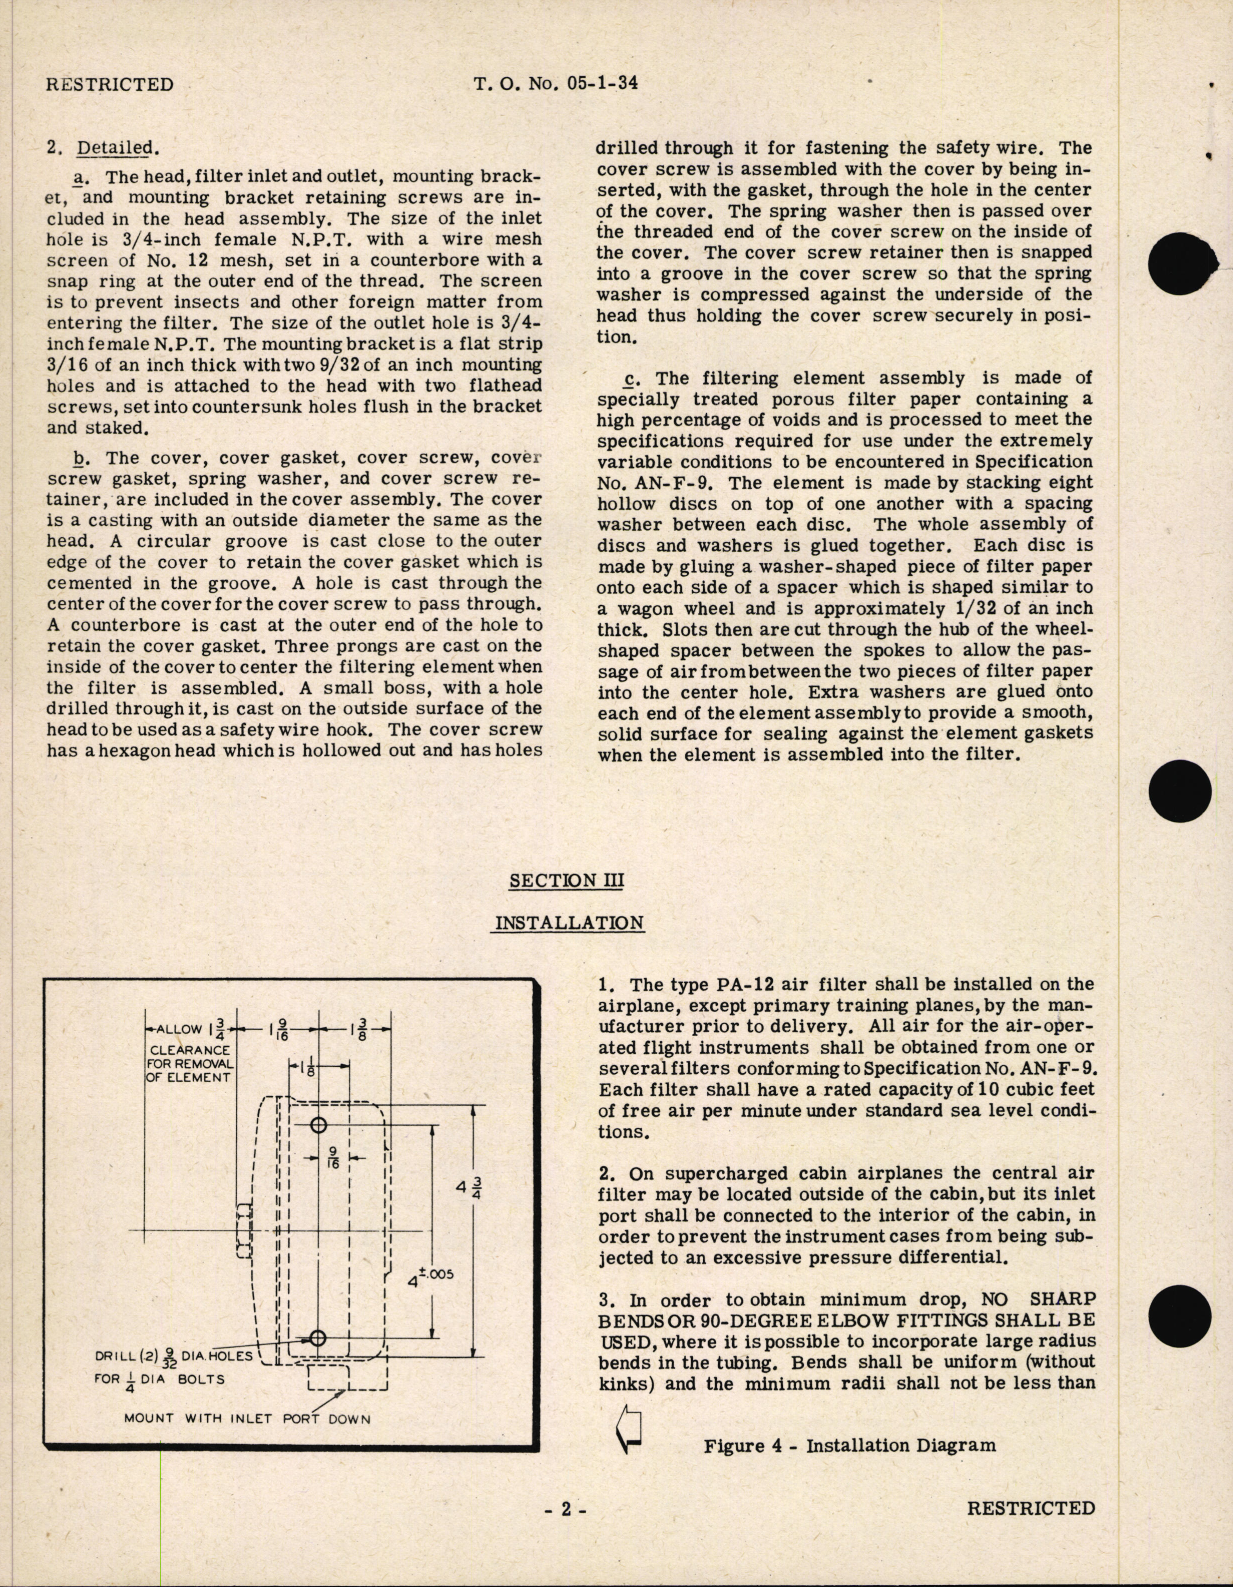 Sample page 6 from AirCorps Library document: Handbook of Instructions with Parts Catalog for Type PA-12 Air Filter